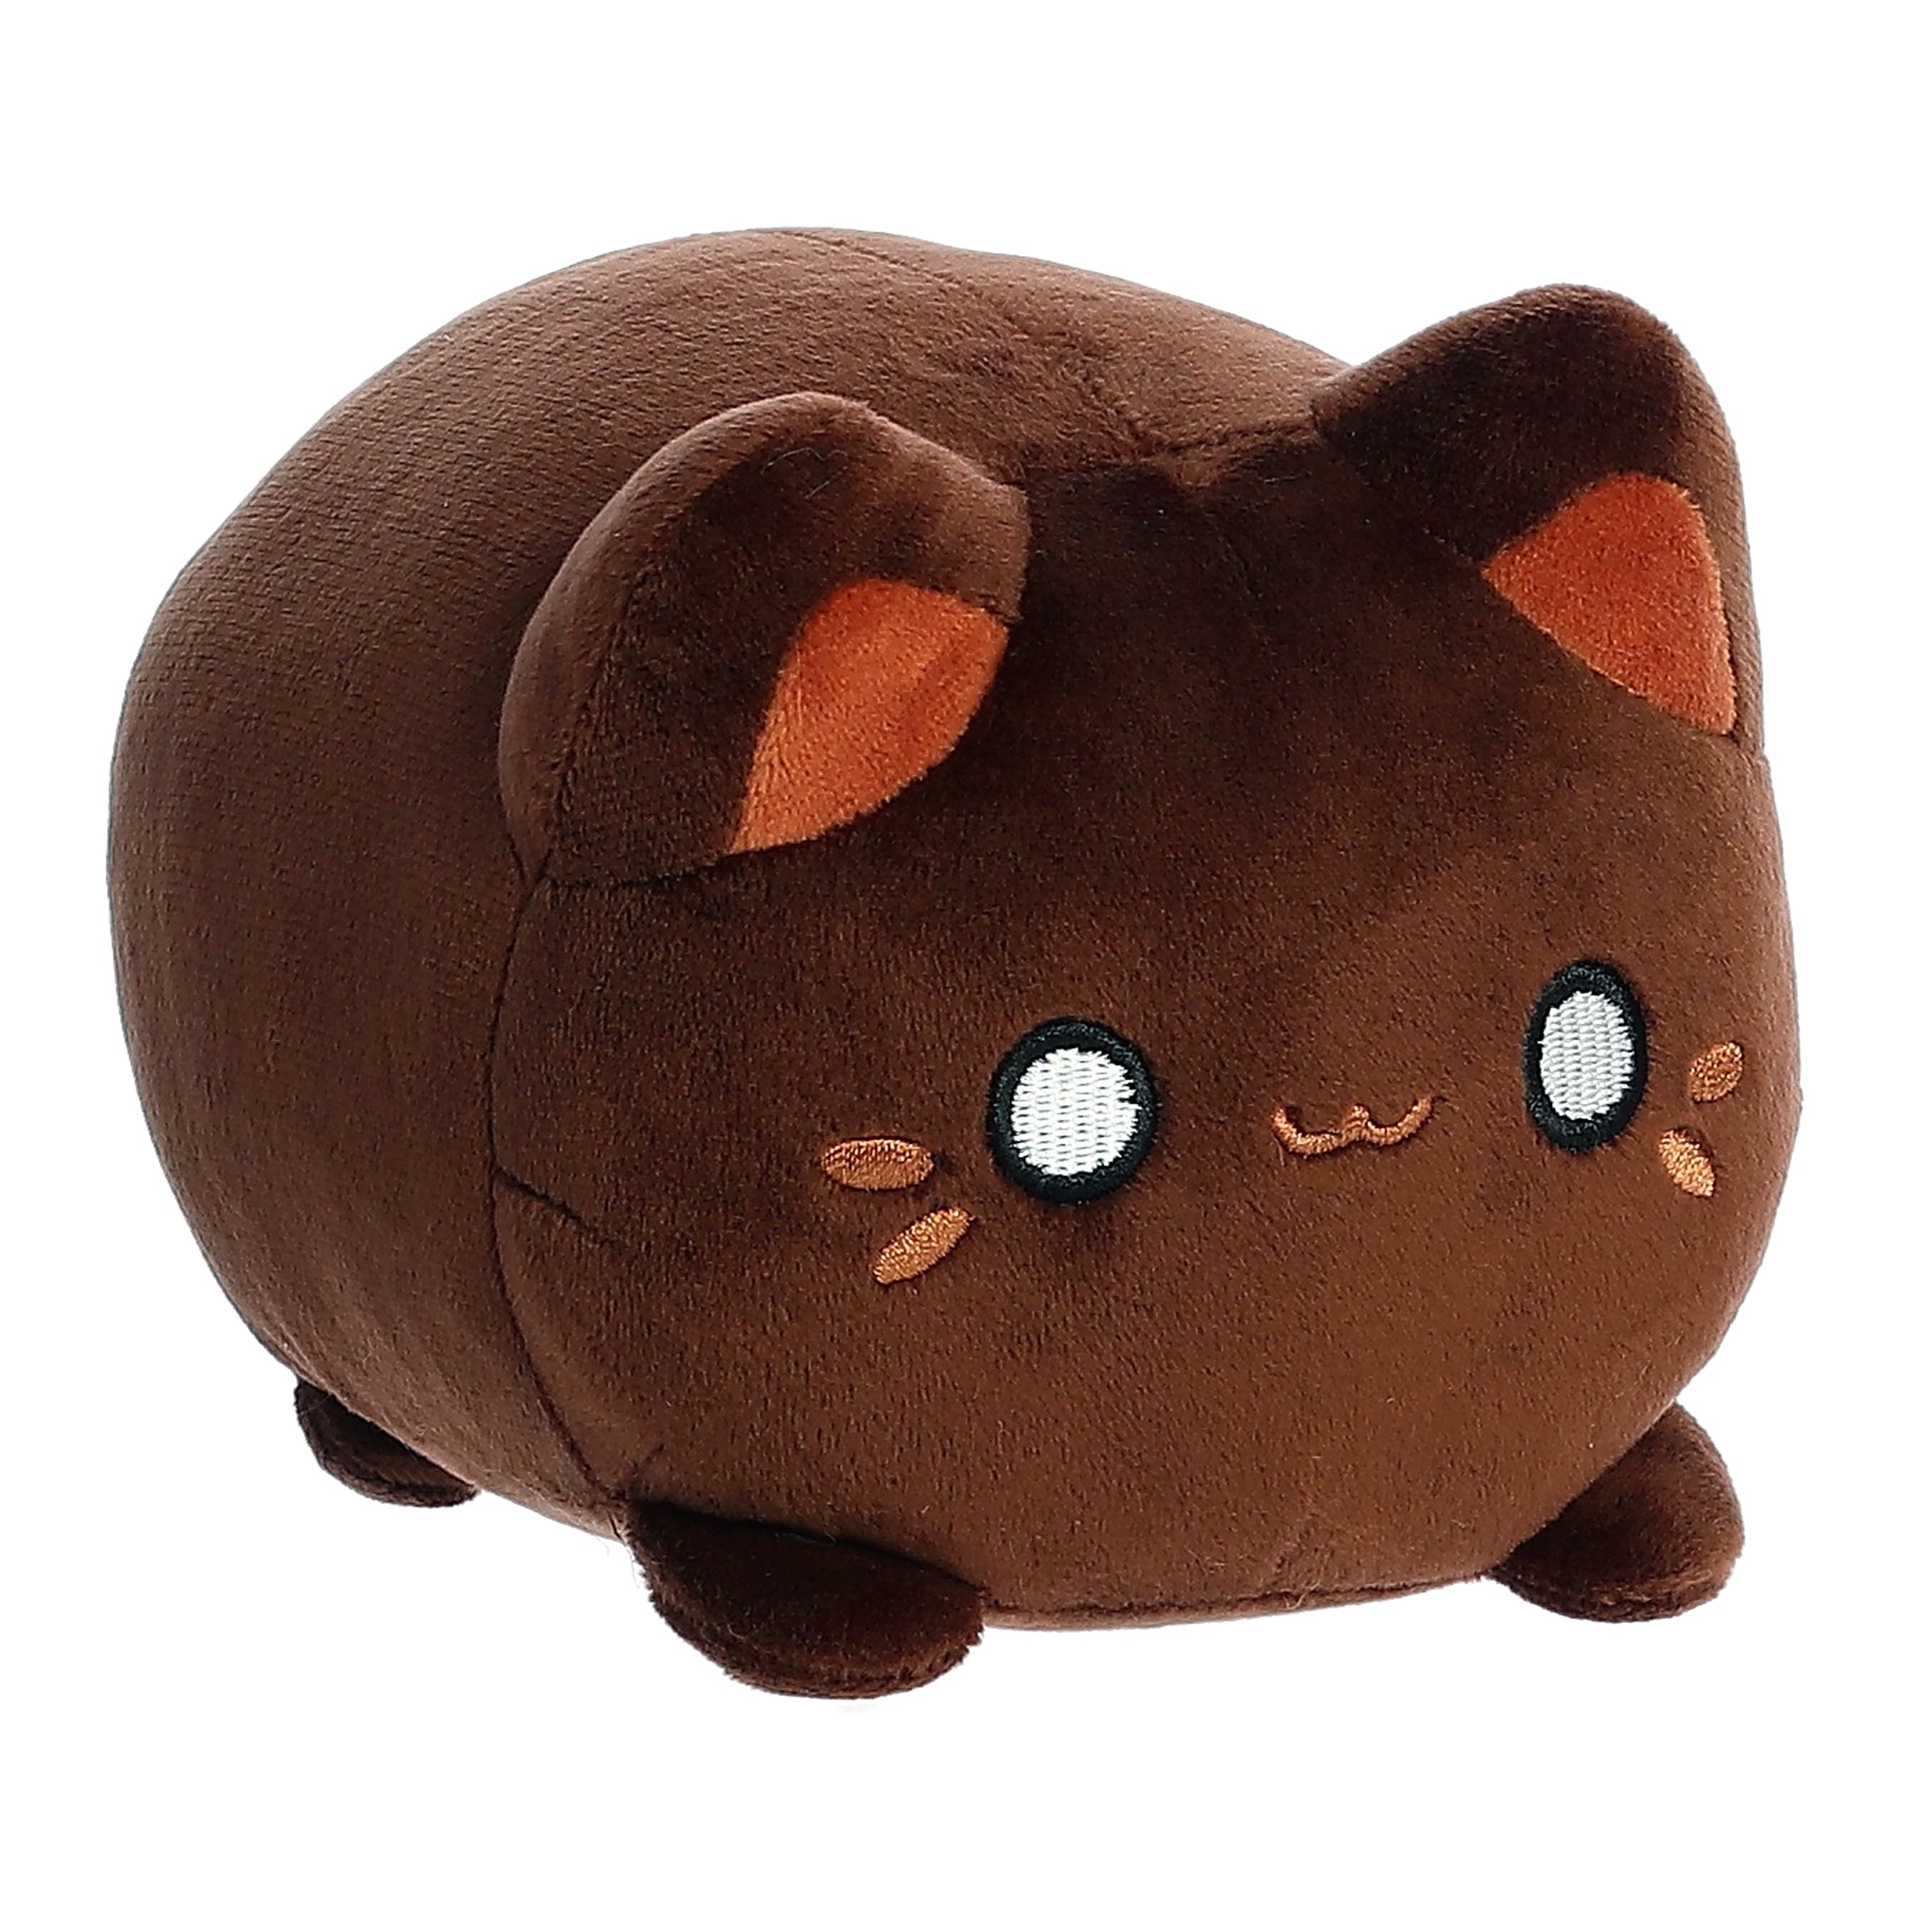 A dark brown Tasty Peach Meowchi plush that is a round cylinder shape with the resemblance of an animated happy cat.